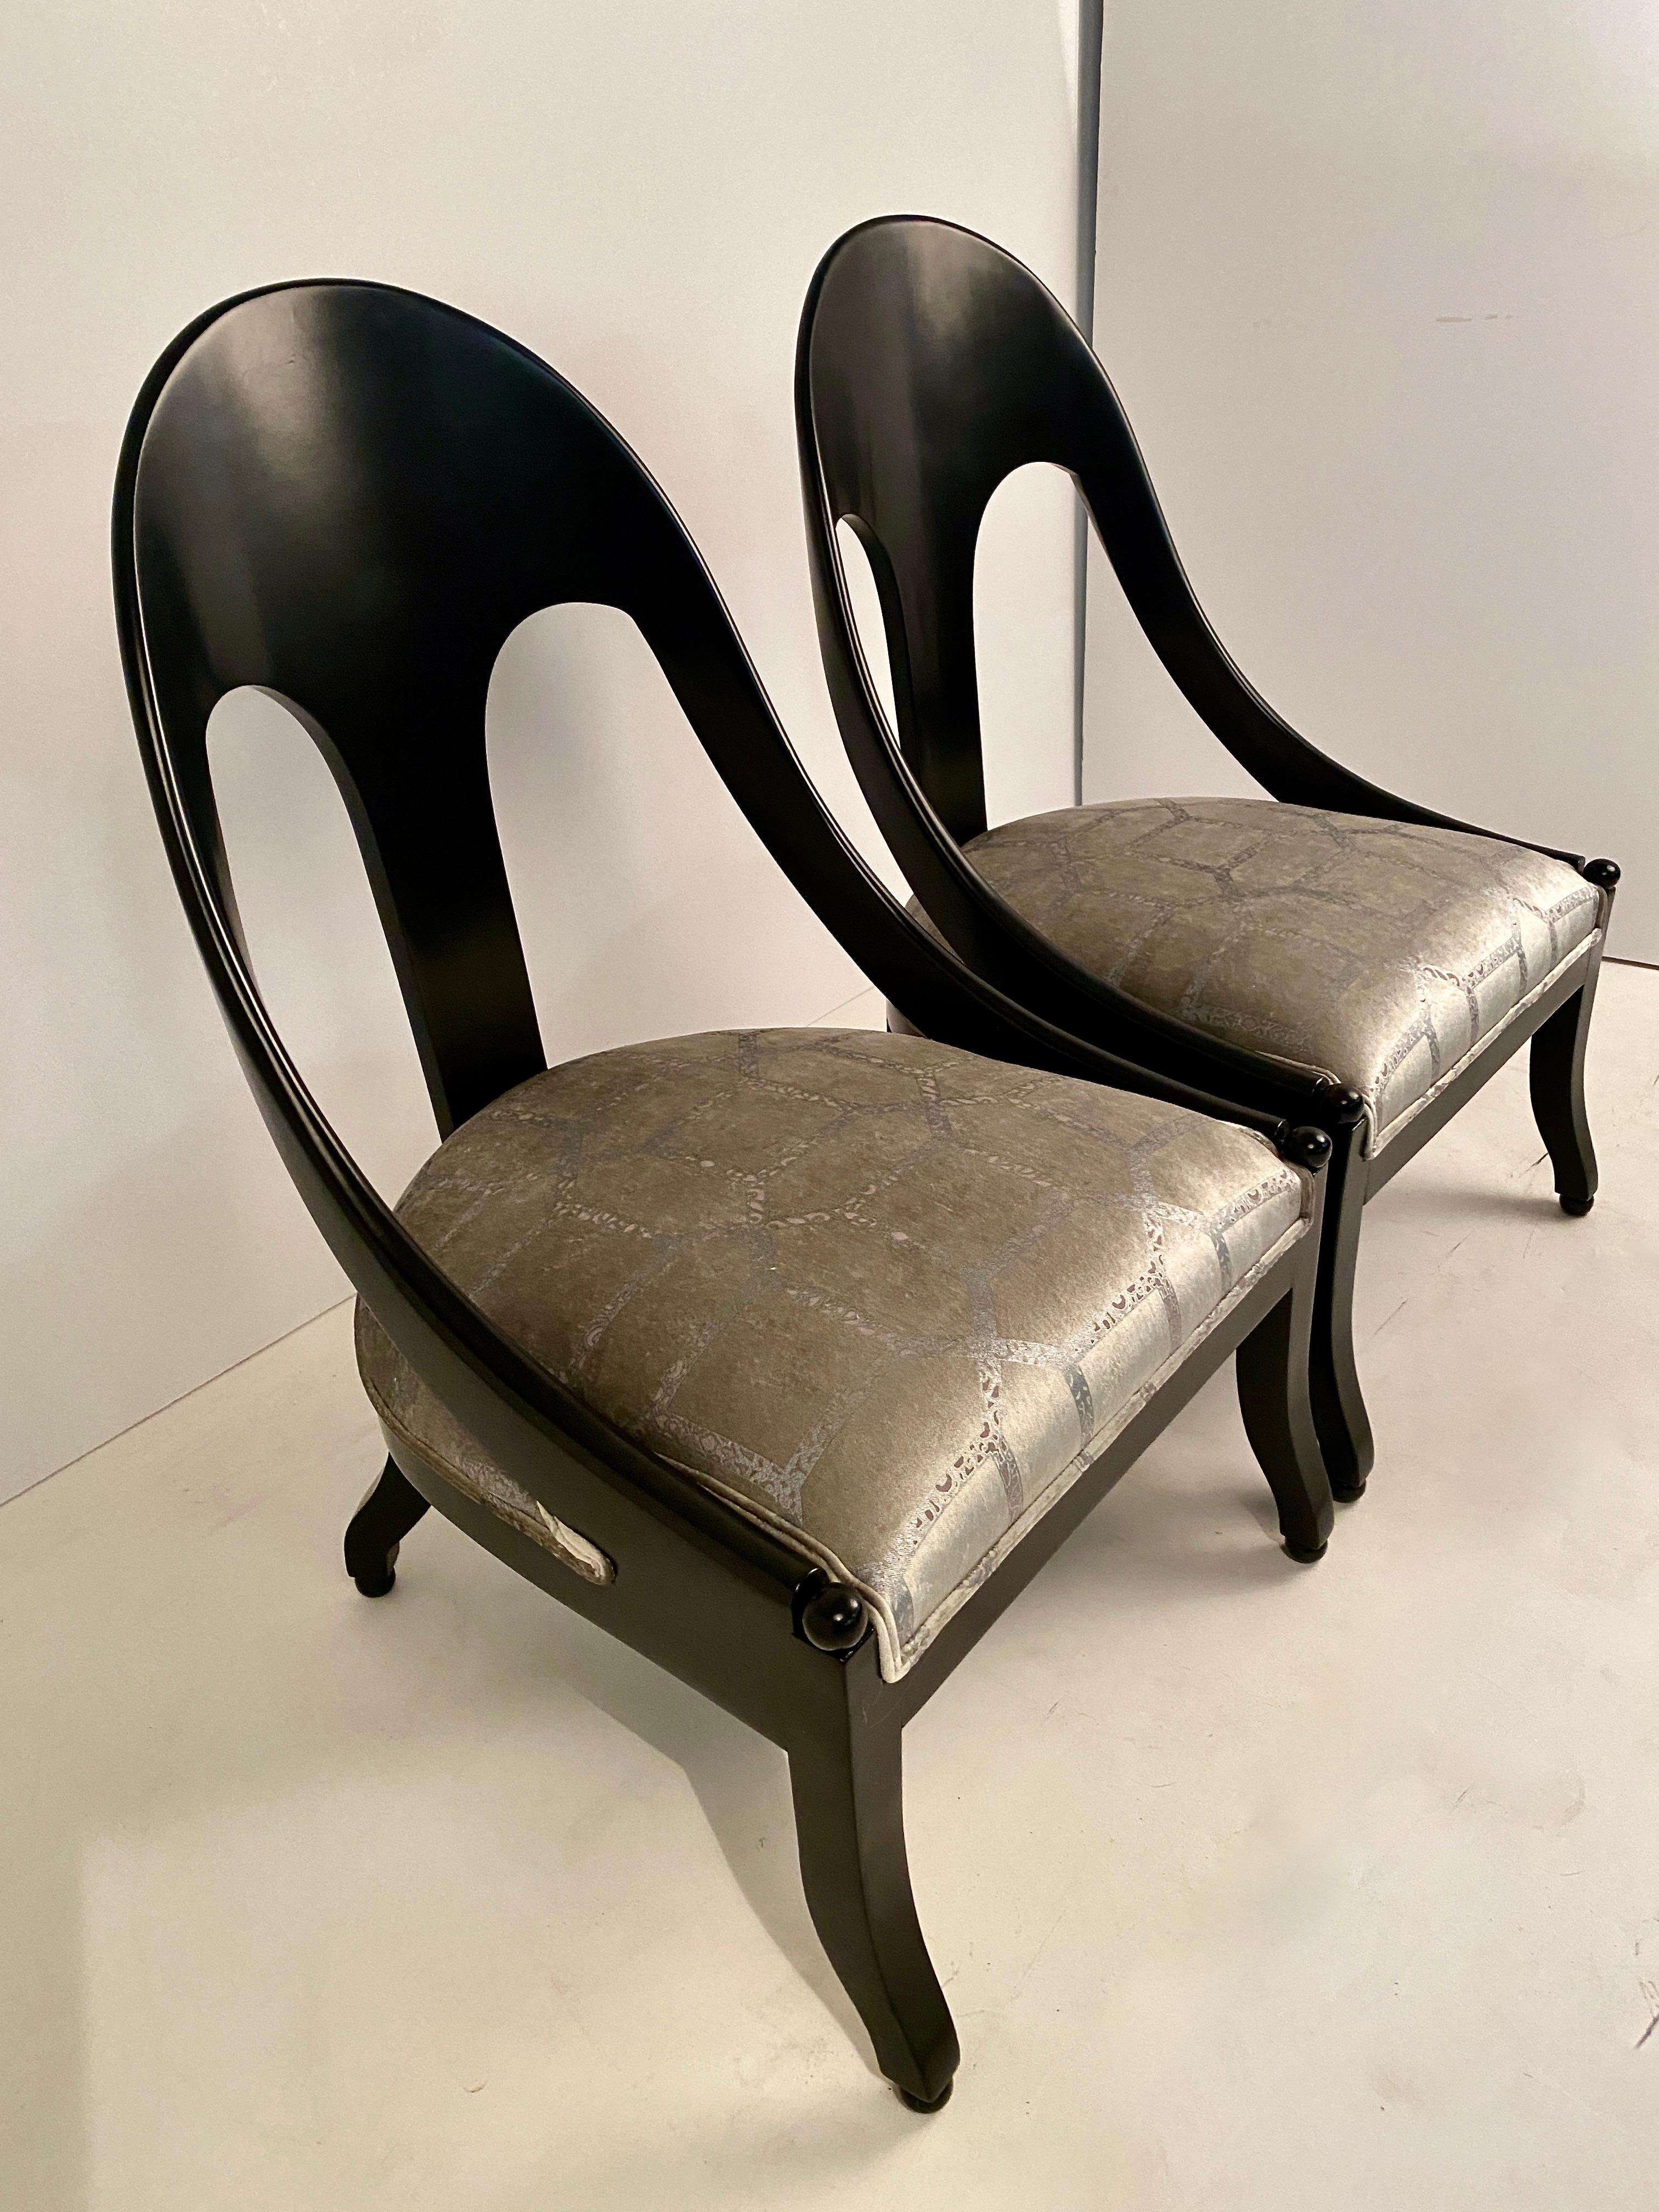 A classic pair of spoon back slipper chairs newly lacquered in black satin lacquer and newly upholstered in silvery silk velvet. An iconic form with great style and sophistication.